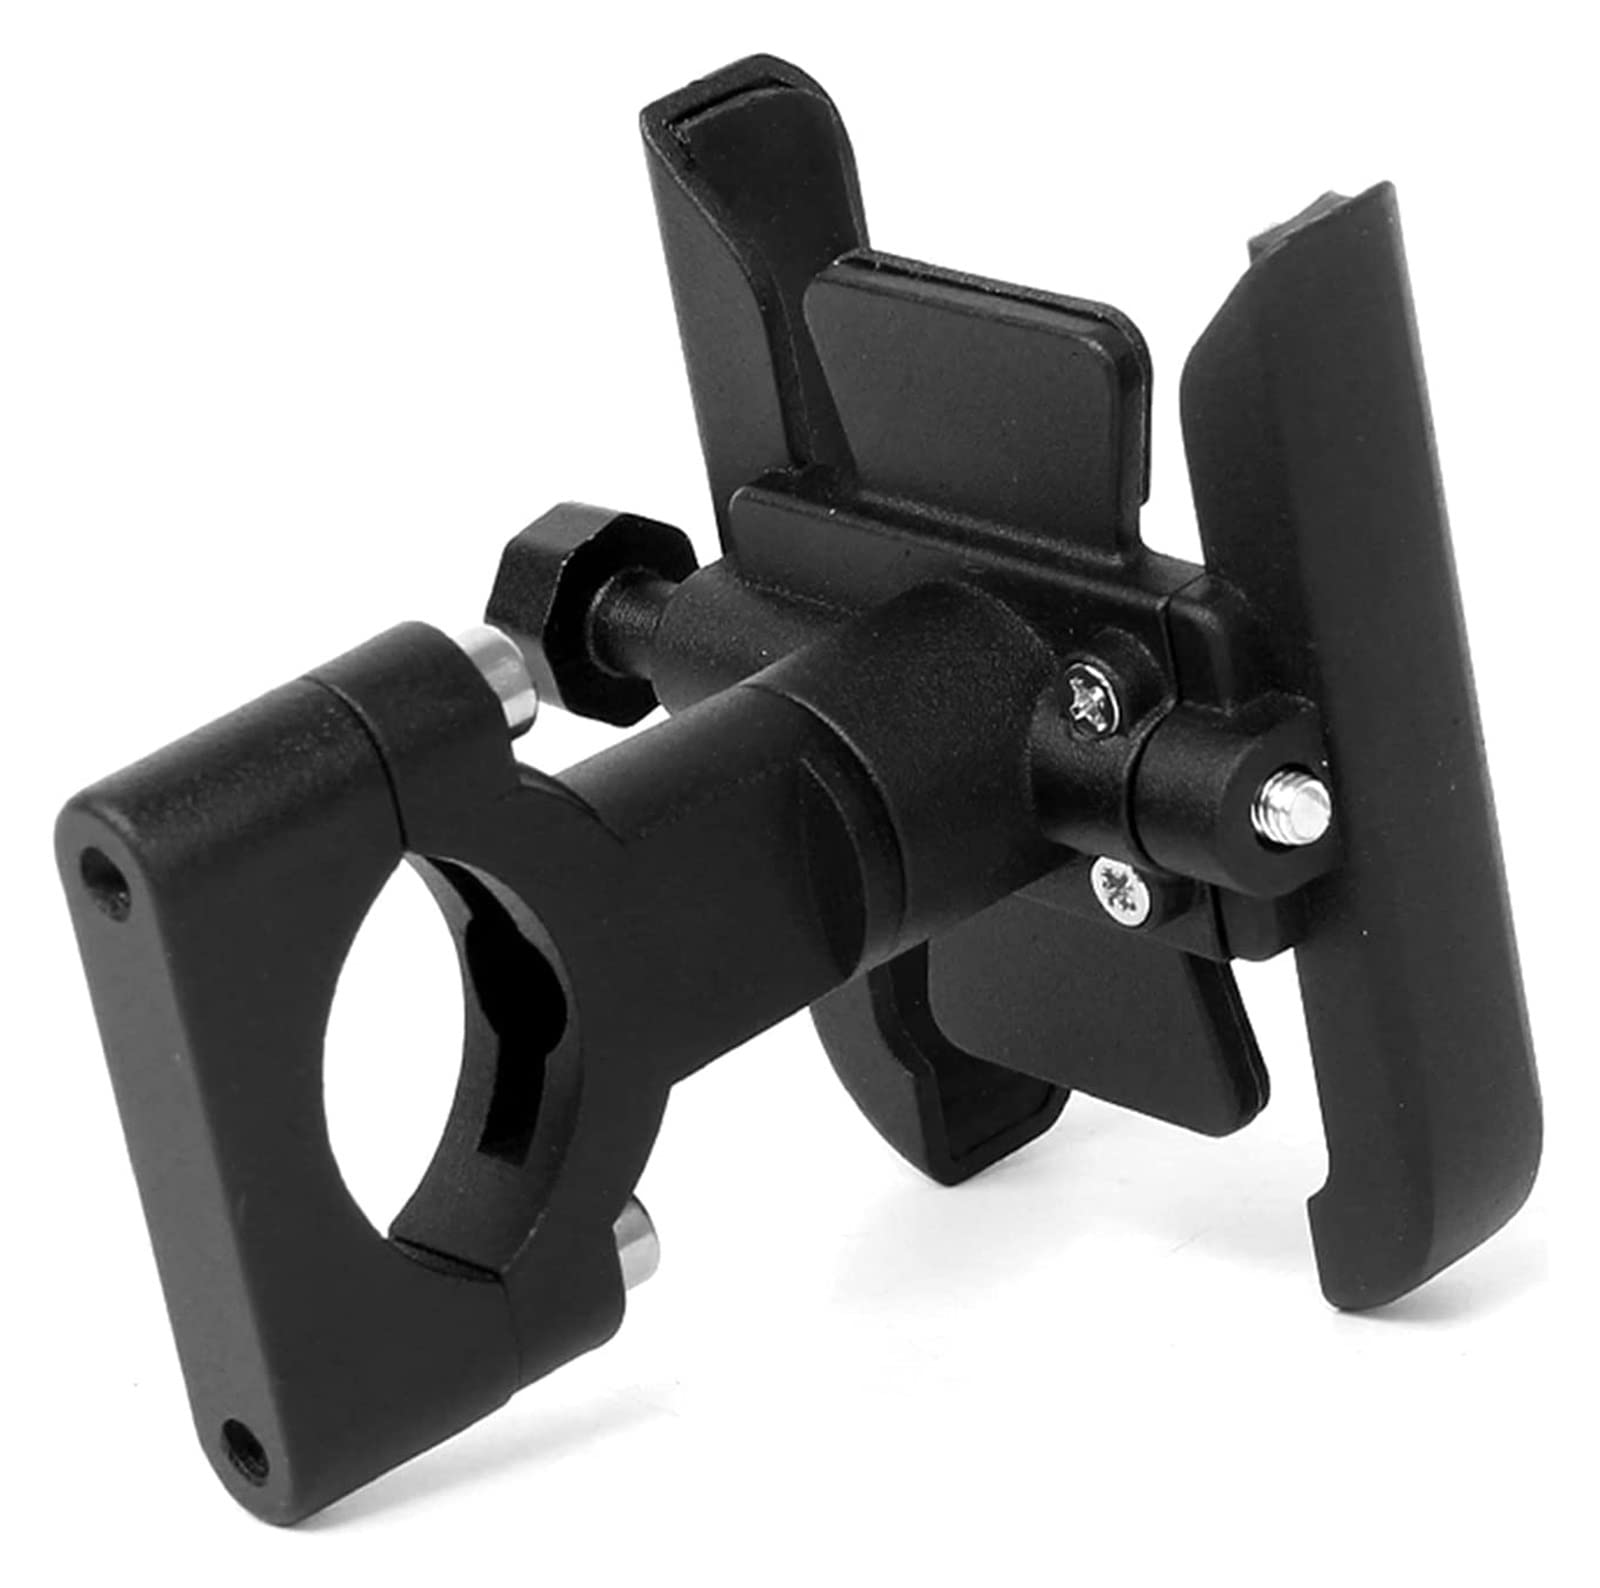 Bike Phone Holder For CFMOTO 150NK 250NK 400NK 650NK NK 150 250 400 650 Motorcycle Accessories Handlebar Mobile Phone Holder GPS Stand Bracket Powersports Electrical Device Mounts ( Color : No USB in